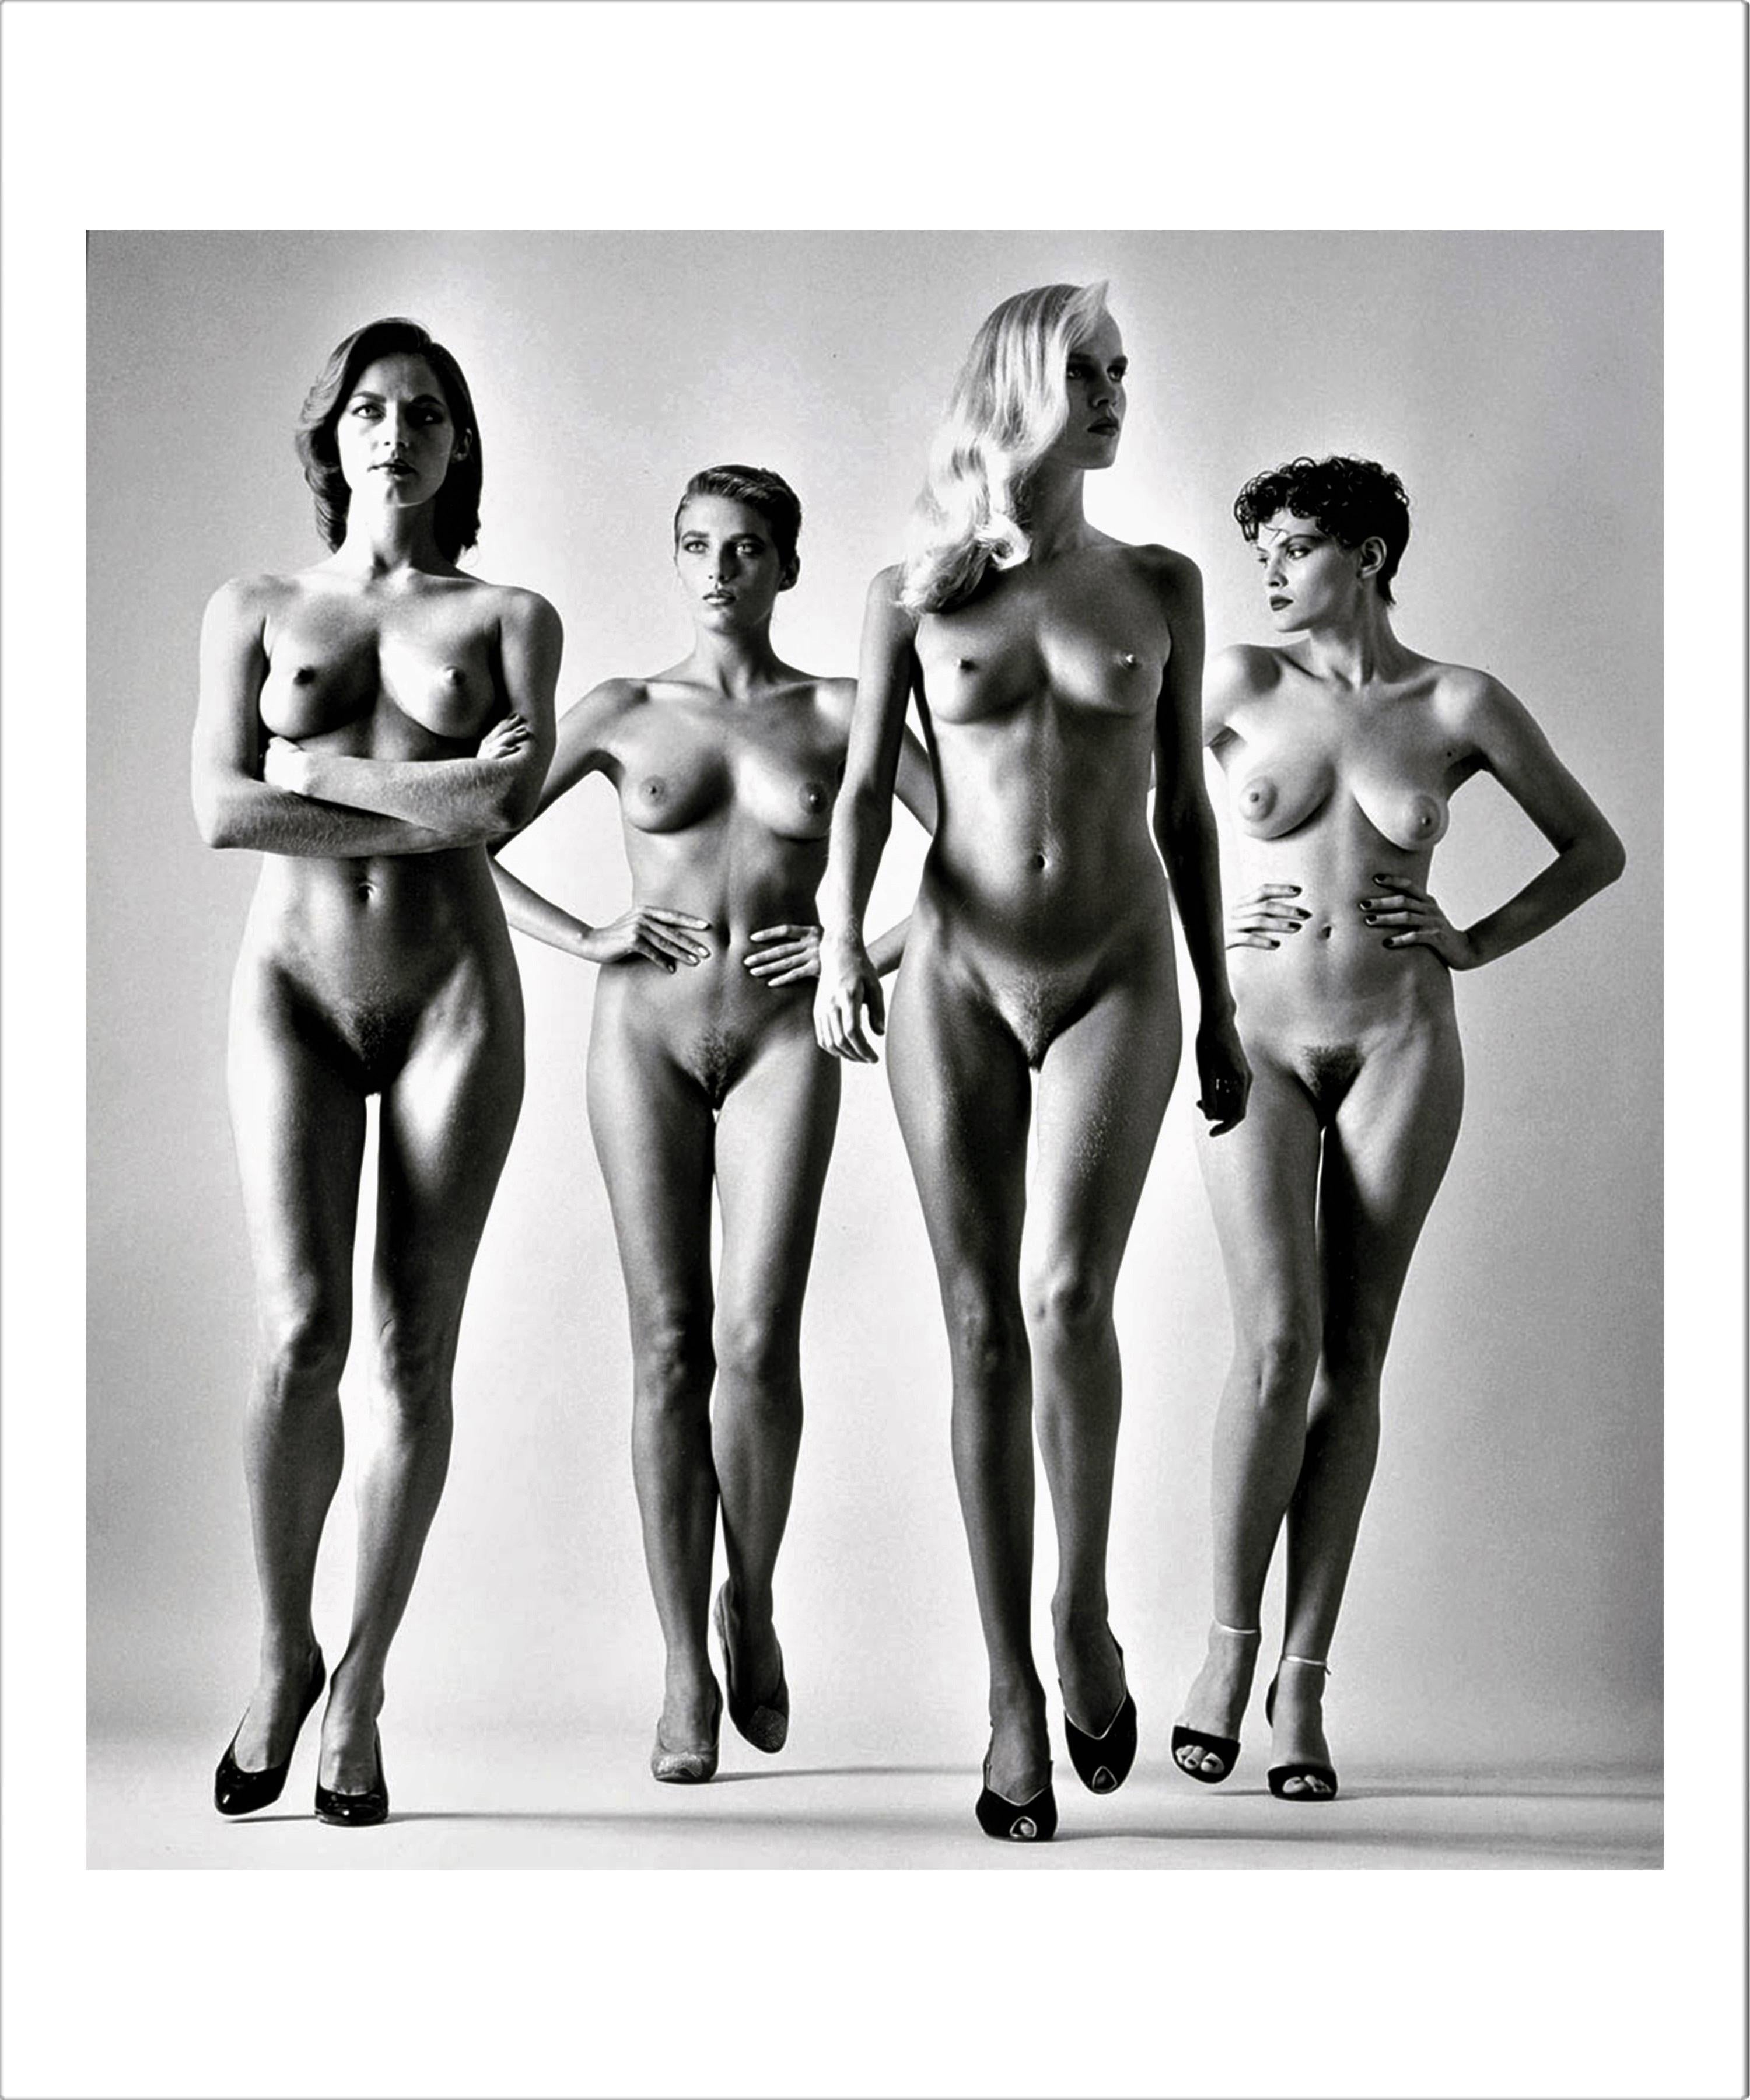 **** This is a private offer for George ****

About the Image:
It is a privilege to offer, Helmut Newton’s legendary nude mural, 40” x 48” image “Sie Kommen”        (“They Are Coming”), considered by fine art photography connoisseurs world-wide, to